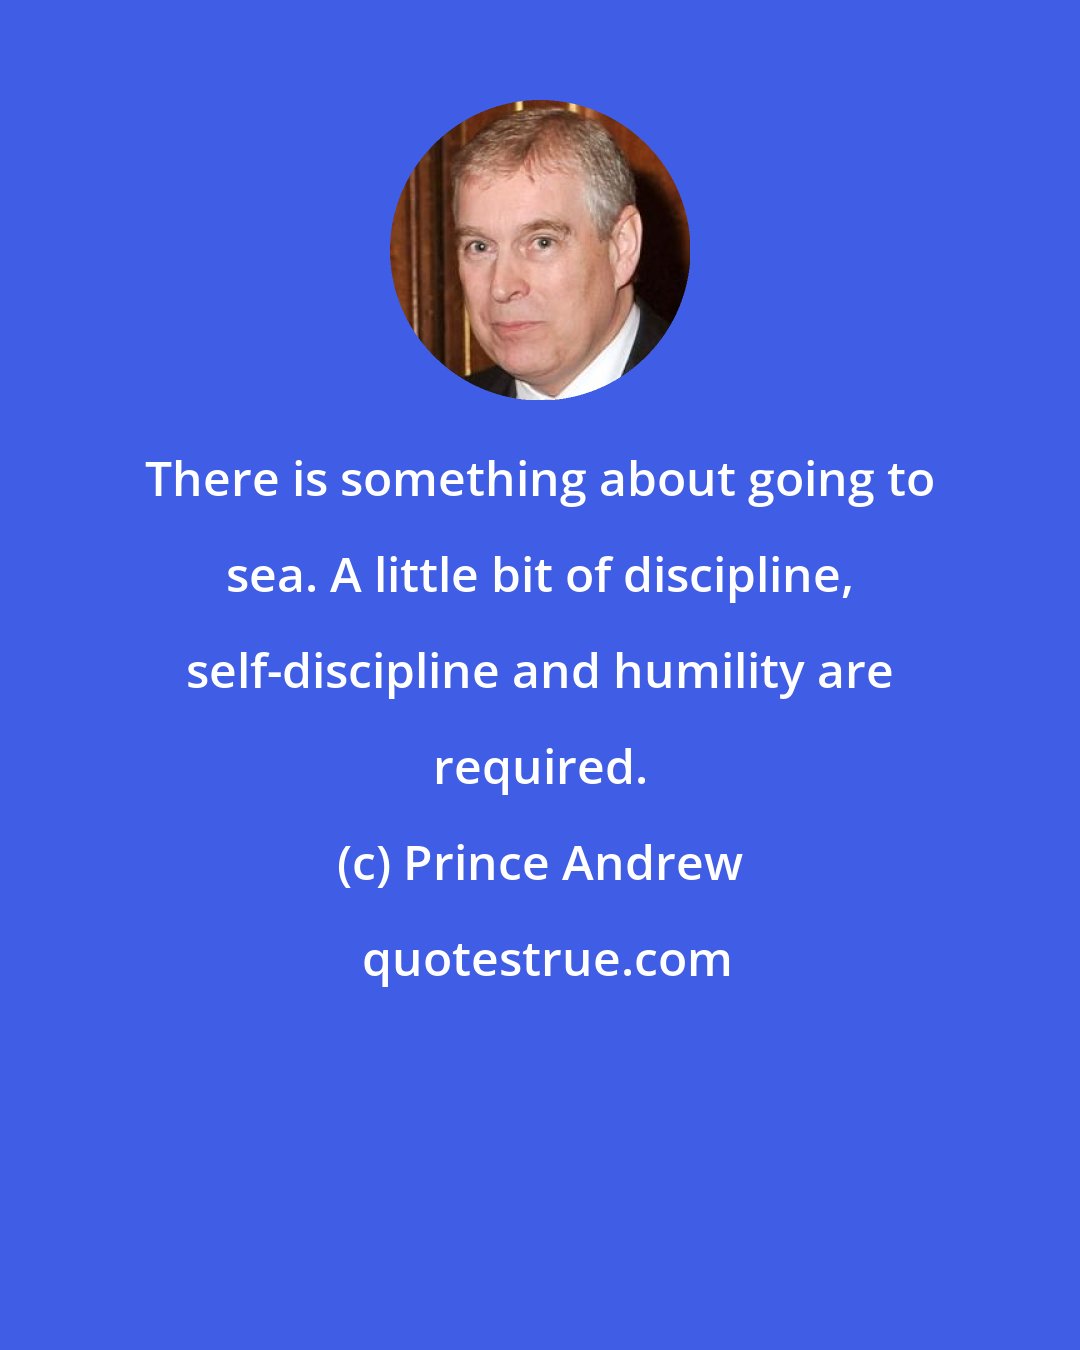 Prince Andrew: There is something about going to sea. A little bit of discipline, self-discipline and humility are required.